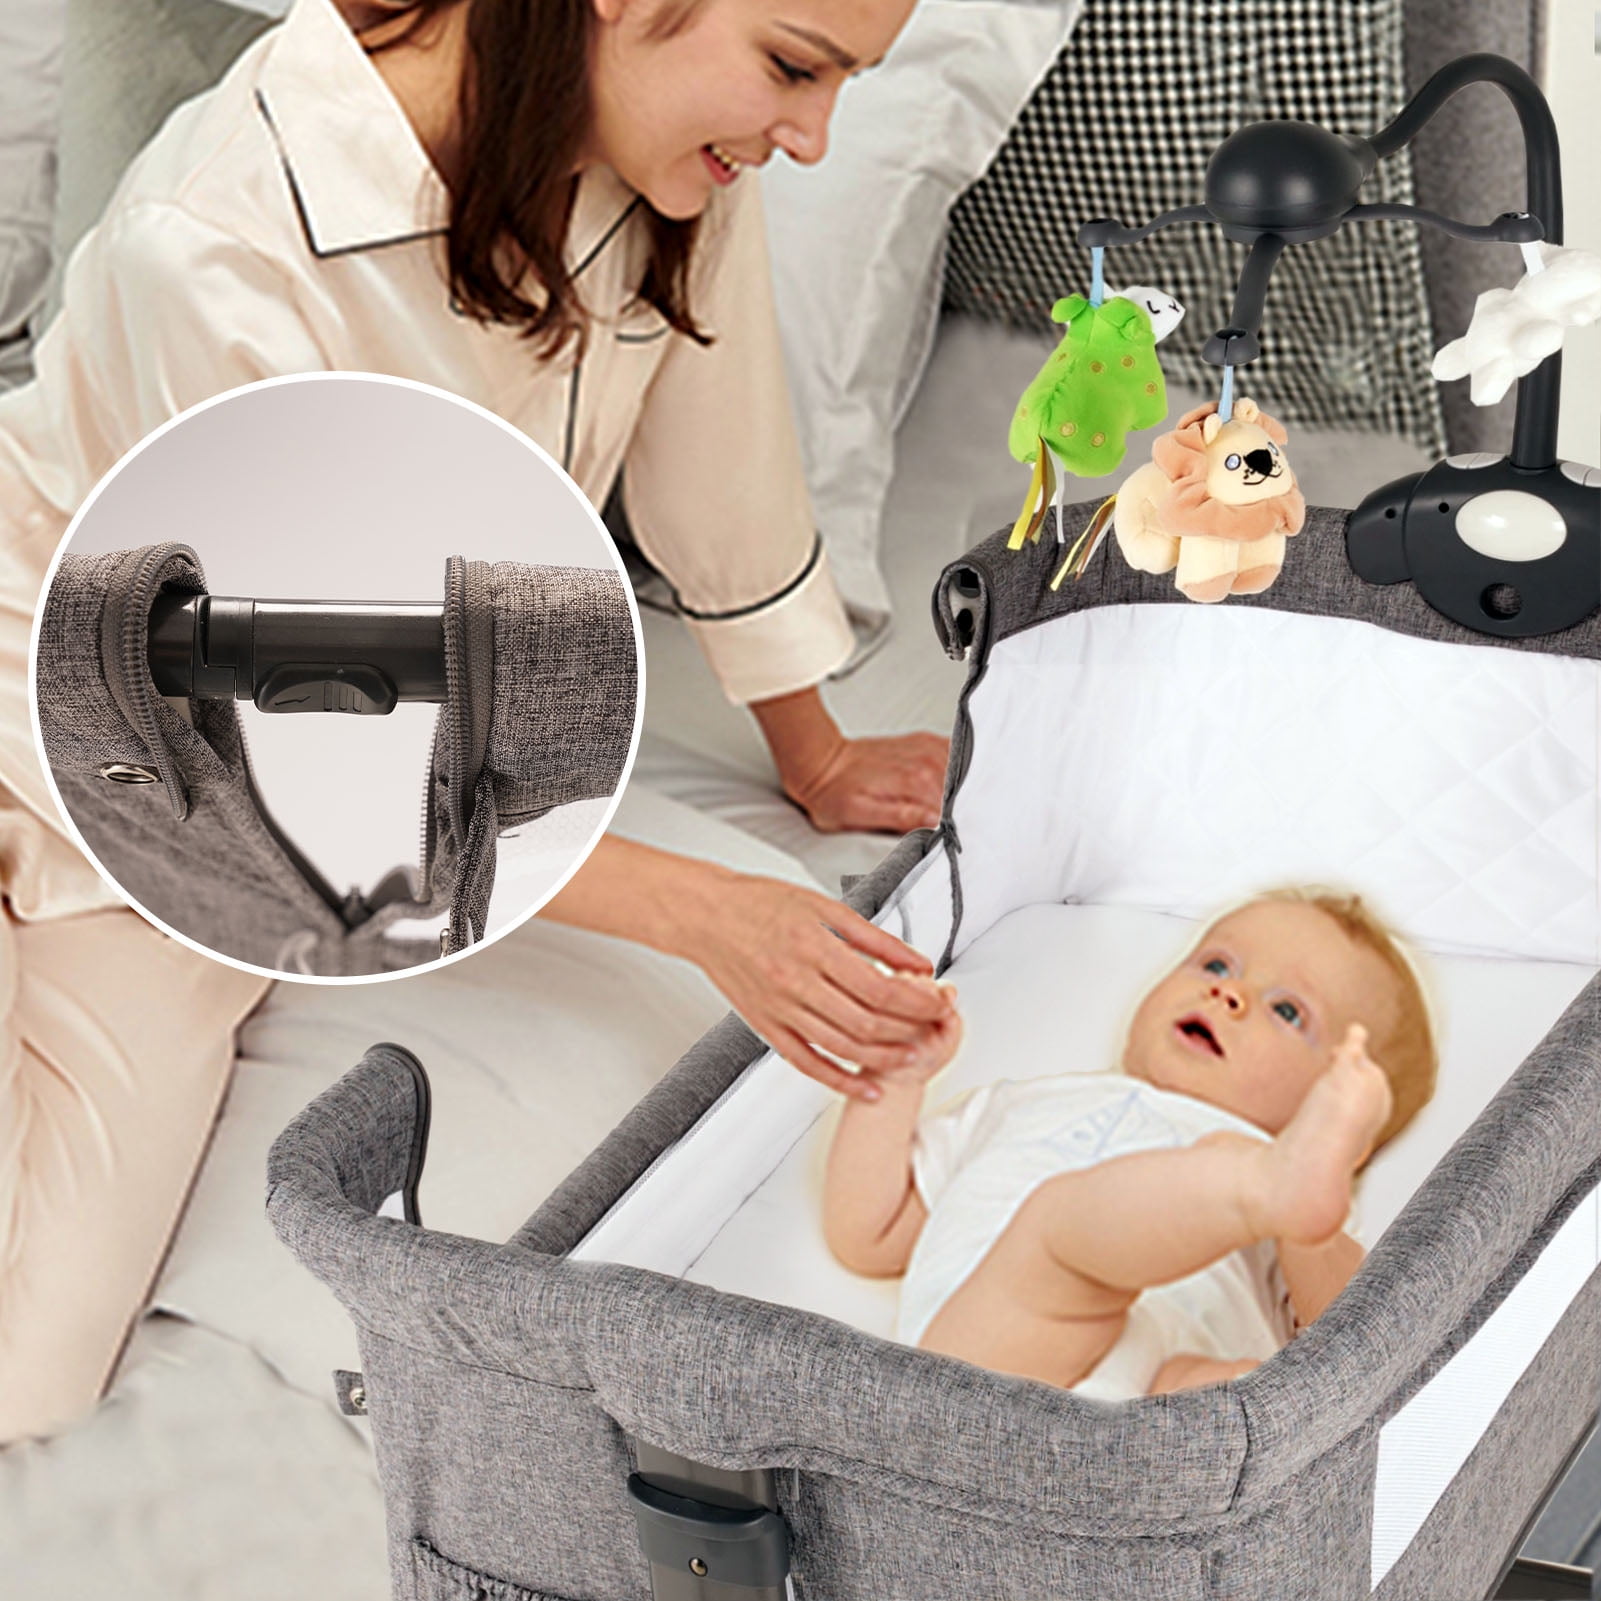 HoneiLife Rocking Bassinet for Baby 3 in 1 Baby Cribs with Mosquito Net Adjustable Bedside Sleeper Easy Folding Baby Bed Portable Baby Travel Bed with Mattress & Detachable Side Panel,Grey 